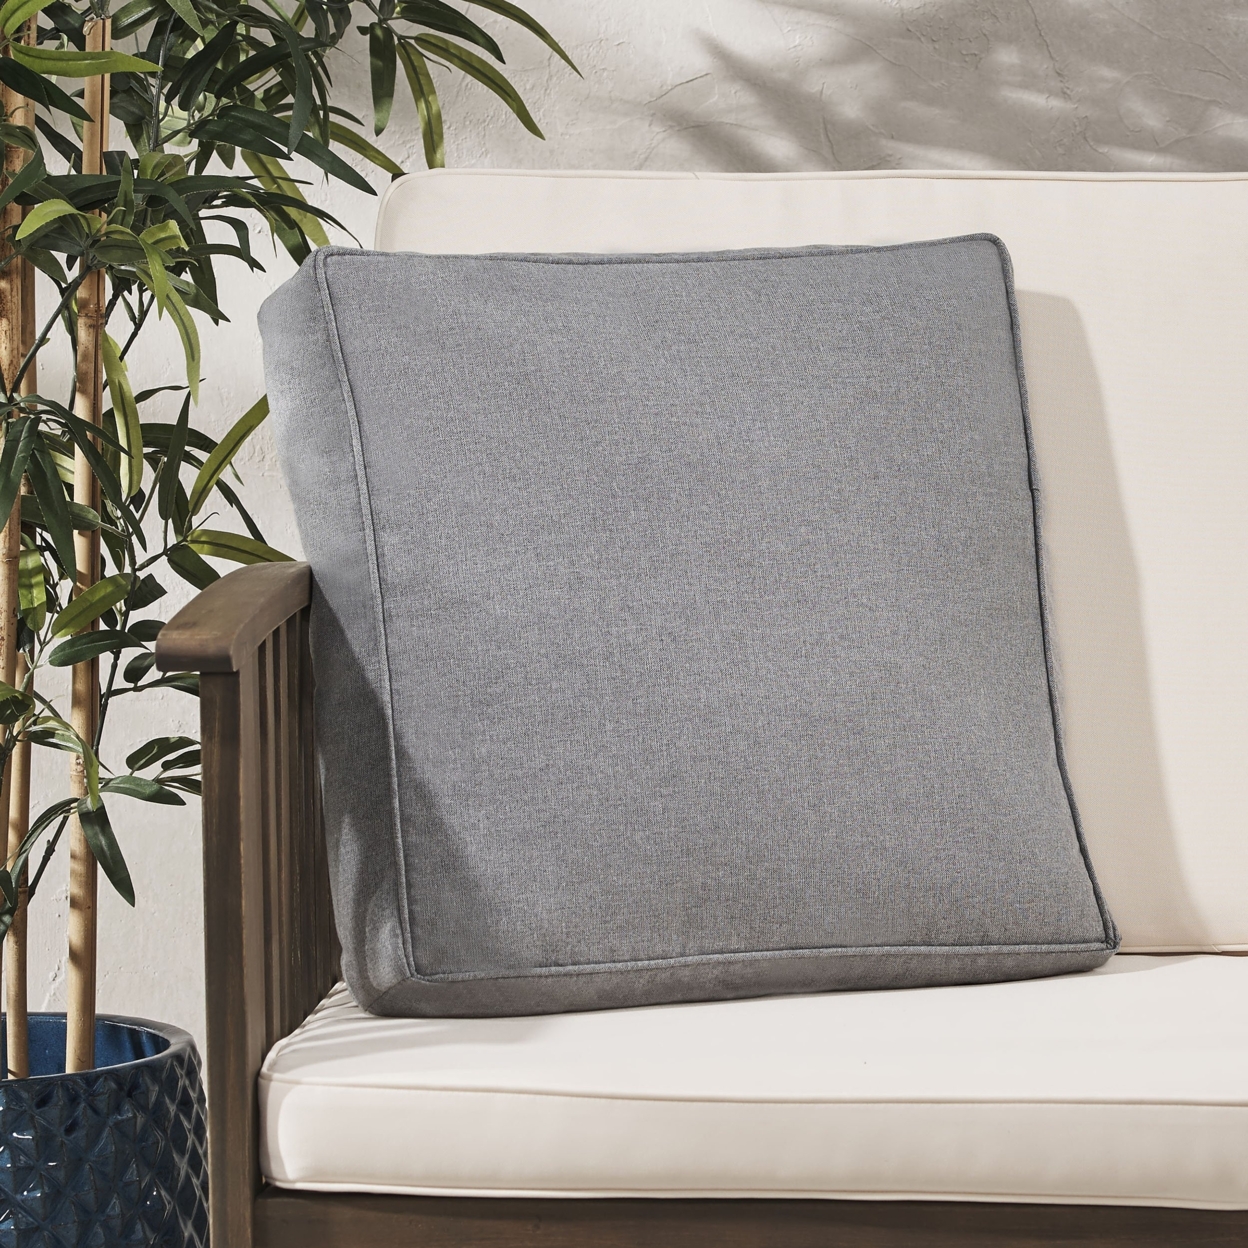 Rydder Coast Outdoor Square Water Resistant 18 Throw Pillow - Charcoal